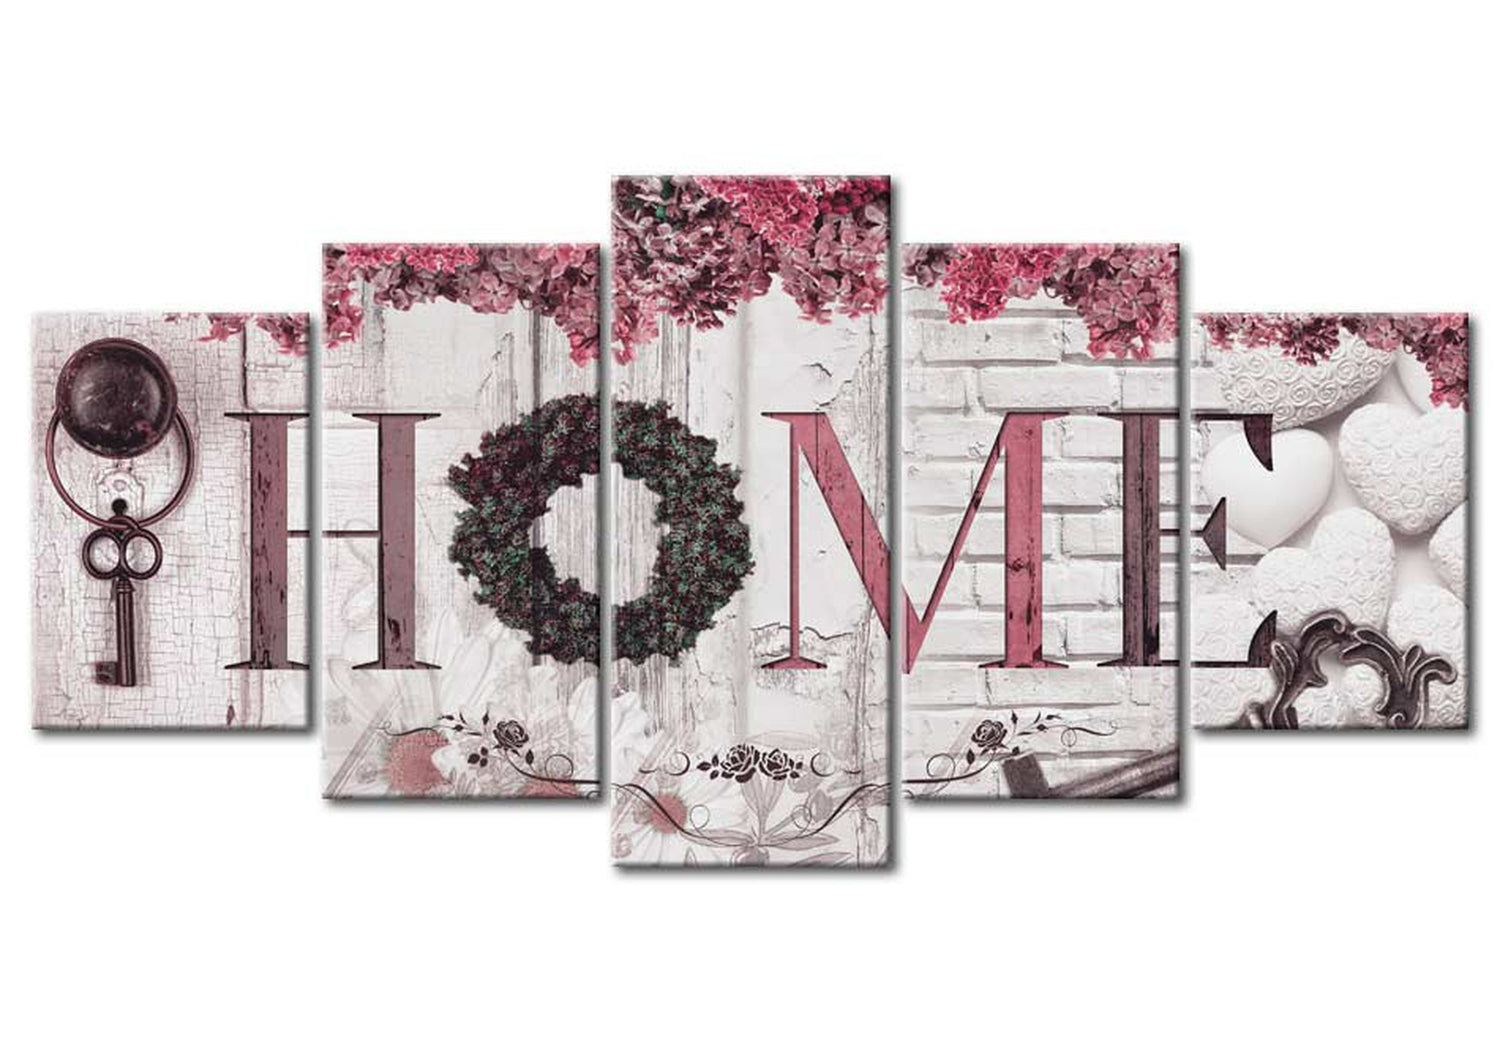 Vintage Canvas Wall Art - House Of Memories - 5 Pieces